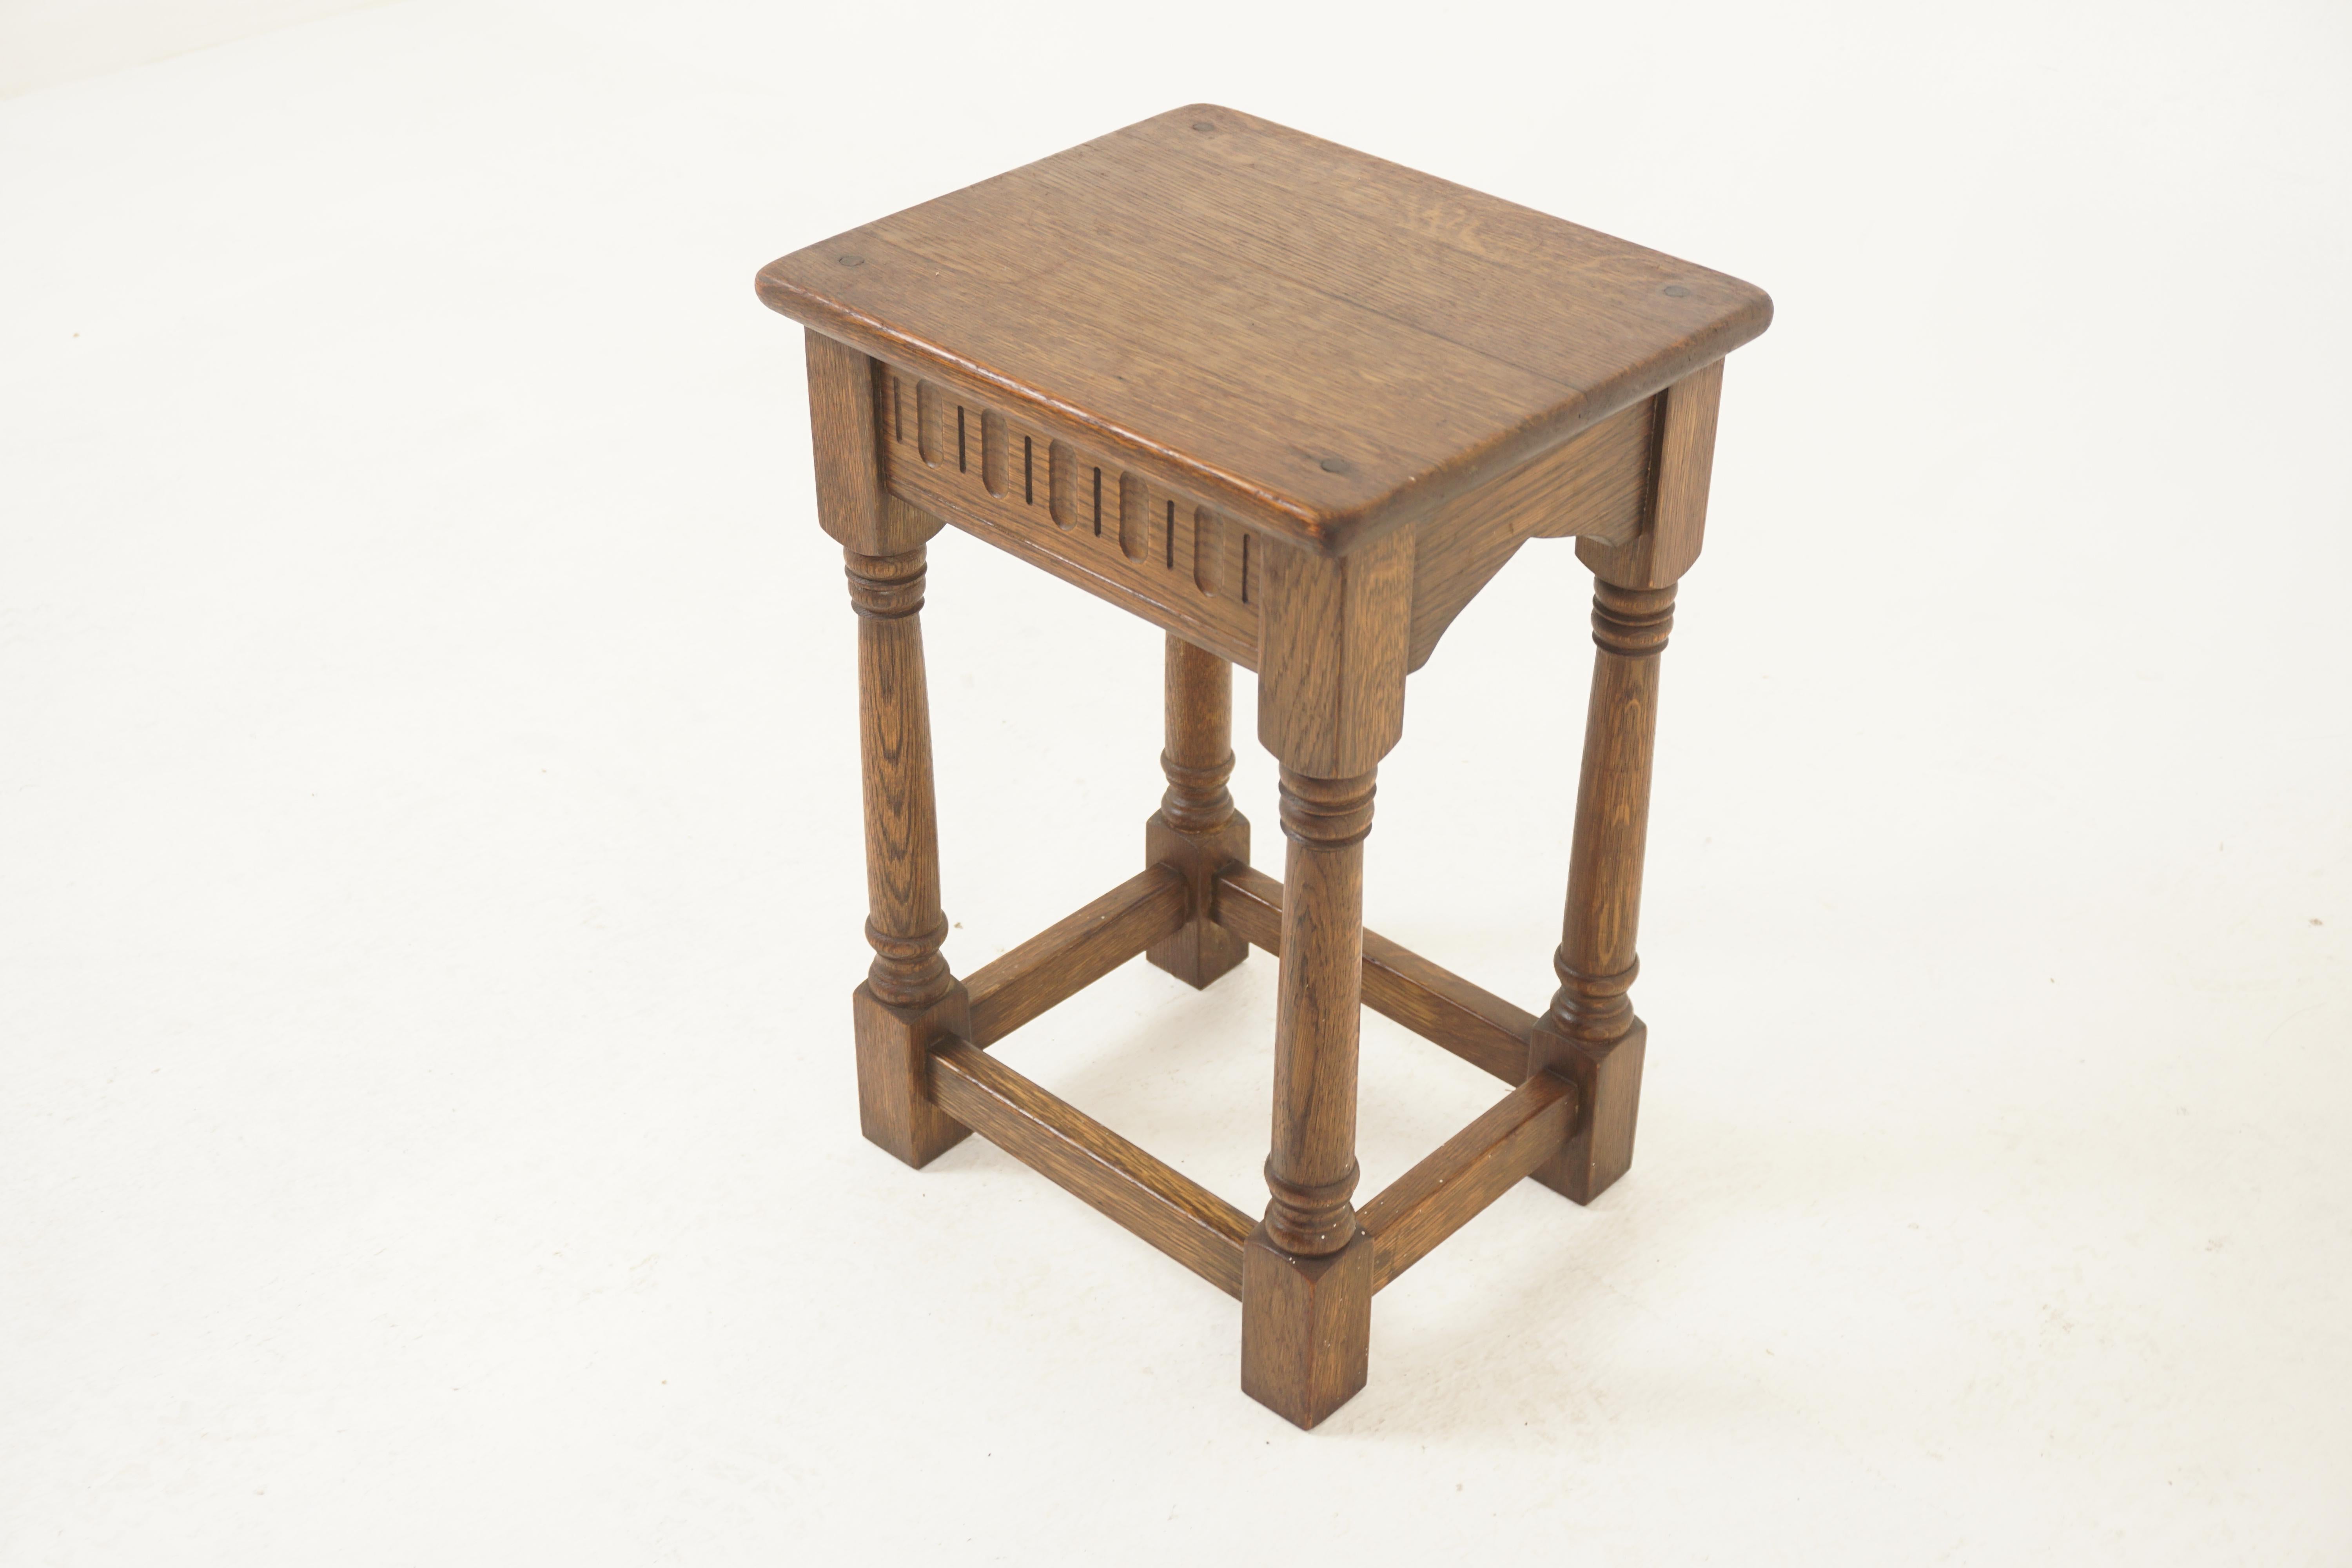 Vintage Oak Stool, End Table, Scotland 1920, H1183

Scotland 1920
Solid Oak
Original finish
Rectangular moulded top
With carved top rail
Standing on slightly splayed legs
With pegged joints
Supported by a base stretcher
Original colour
Very sturdy